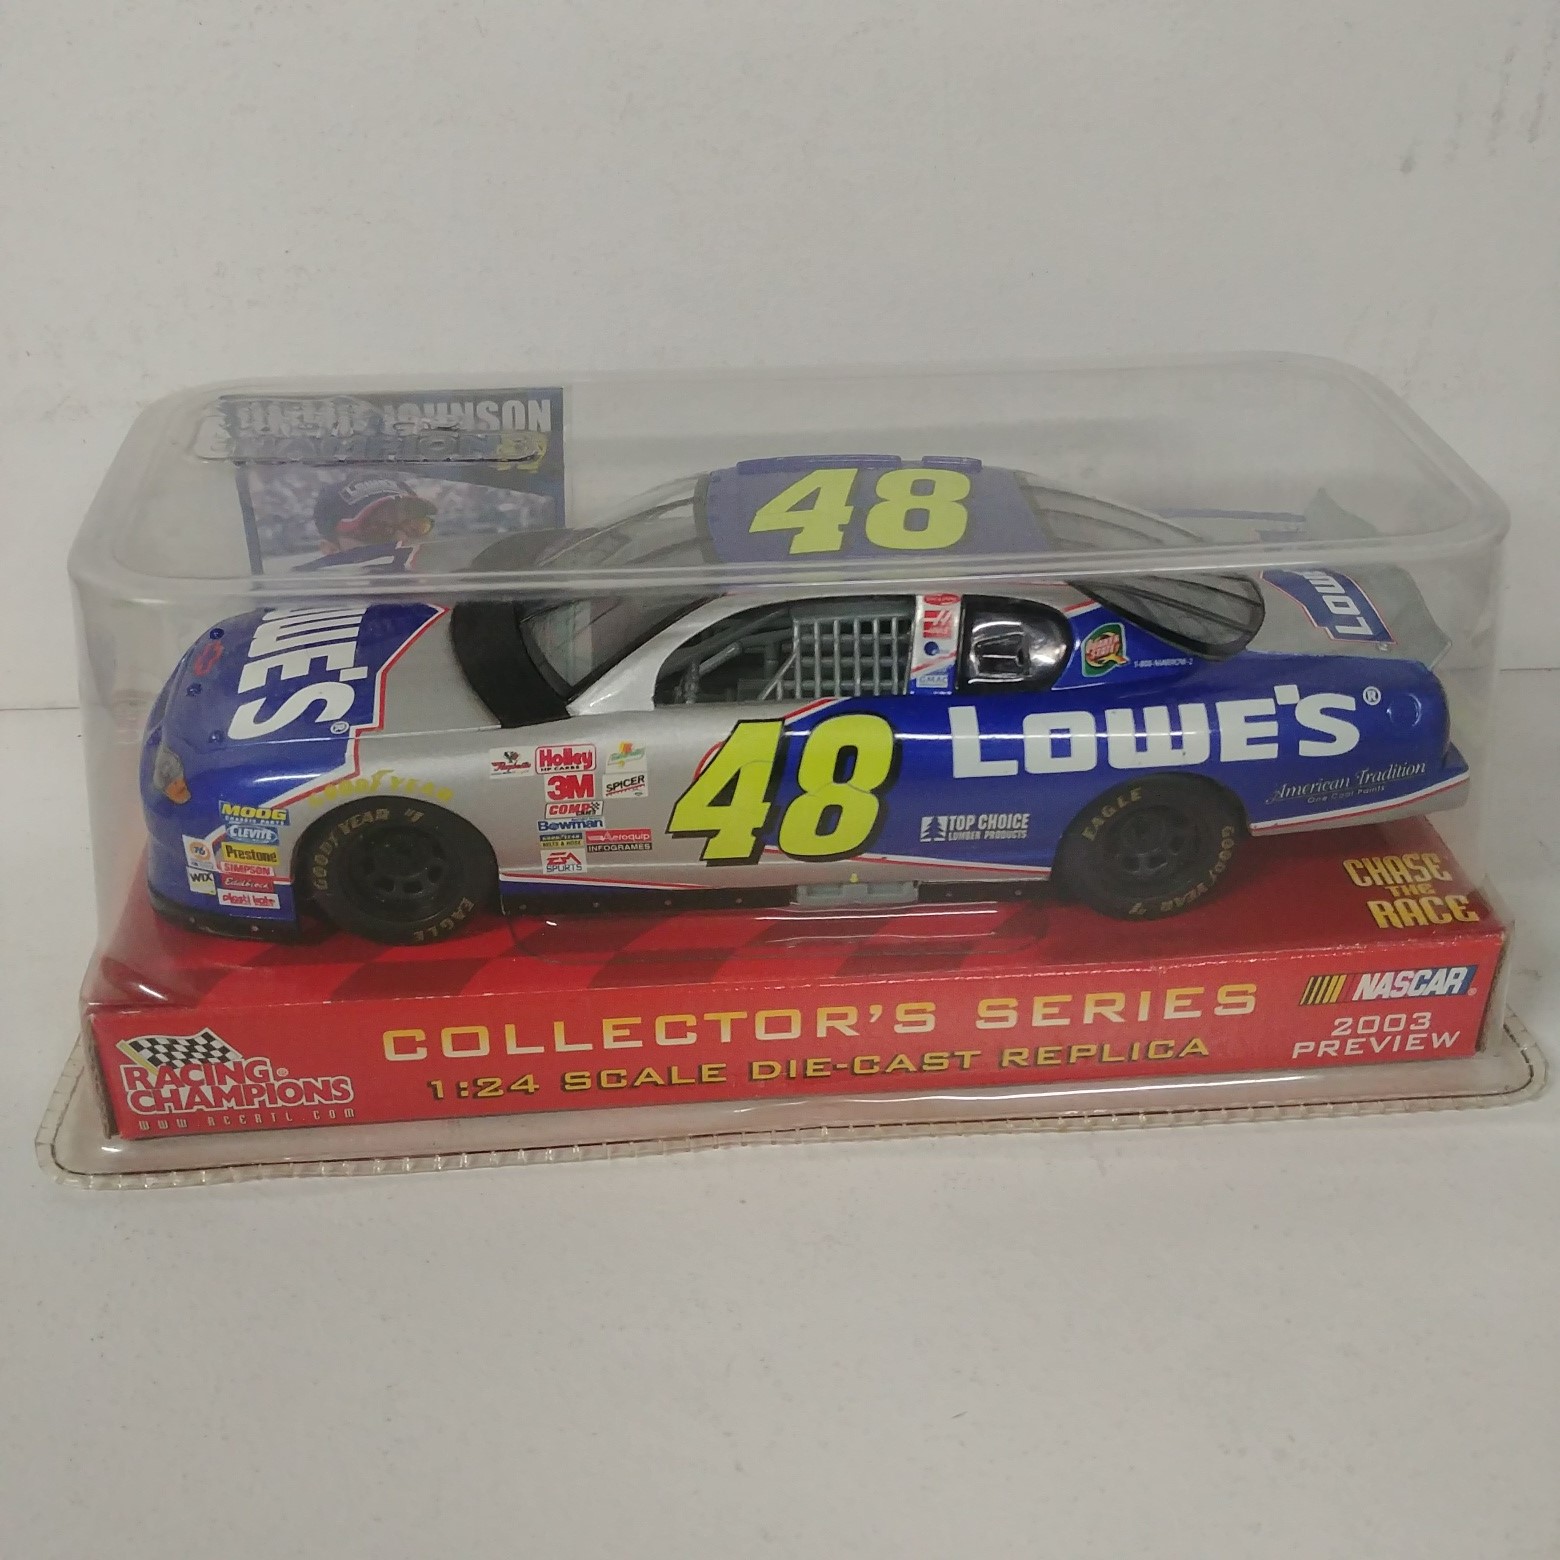 2003 Jimmie Johnson 1/24th Lowe's "Preview" car